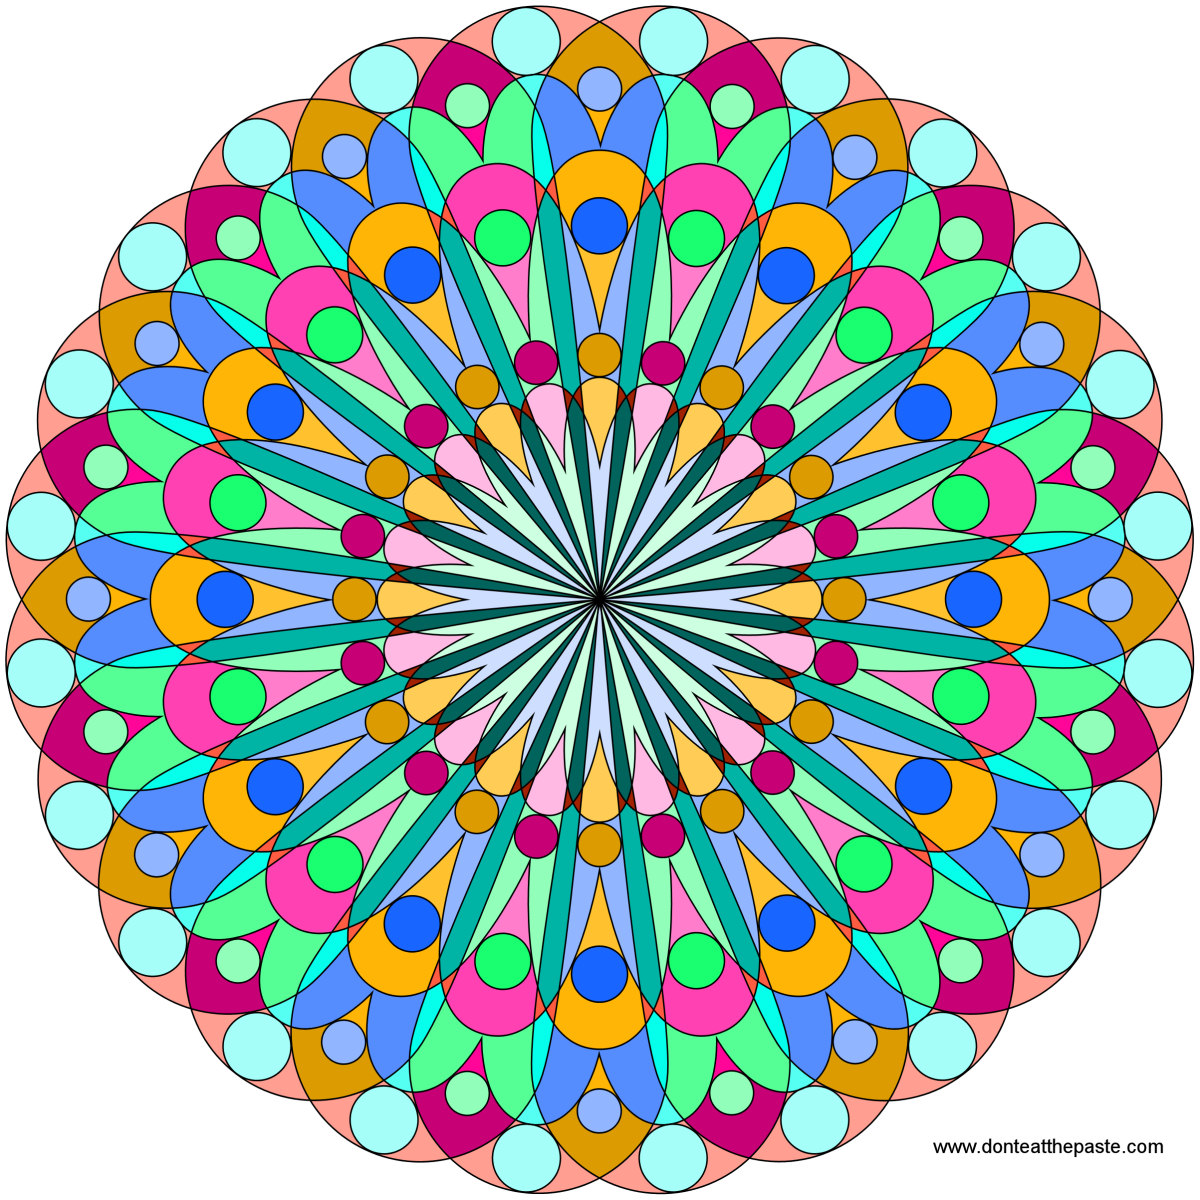 mandala- blank version available to color